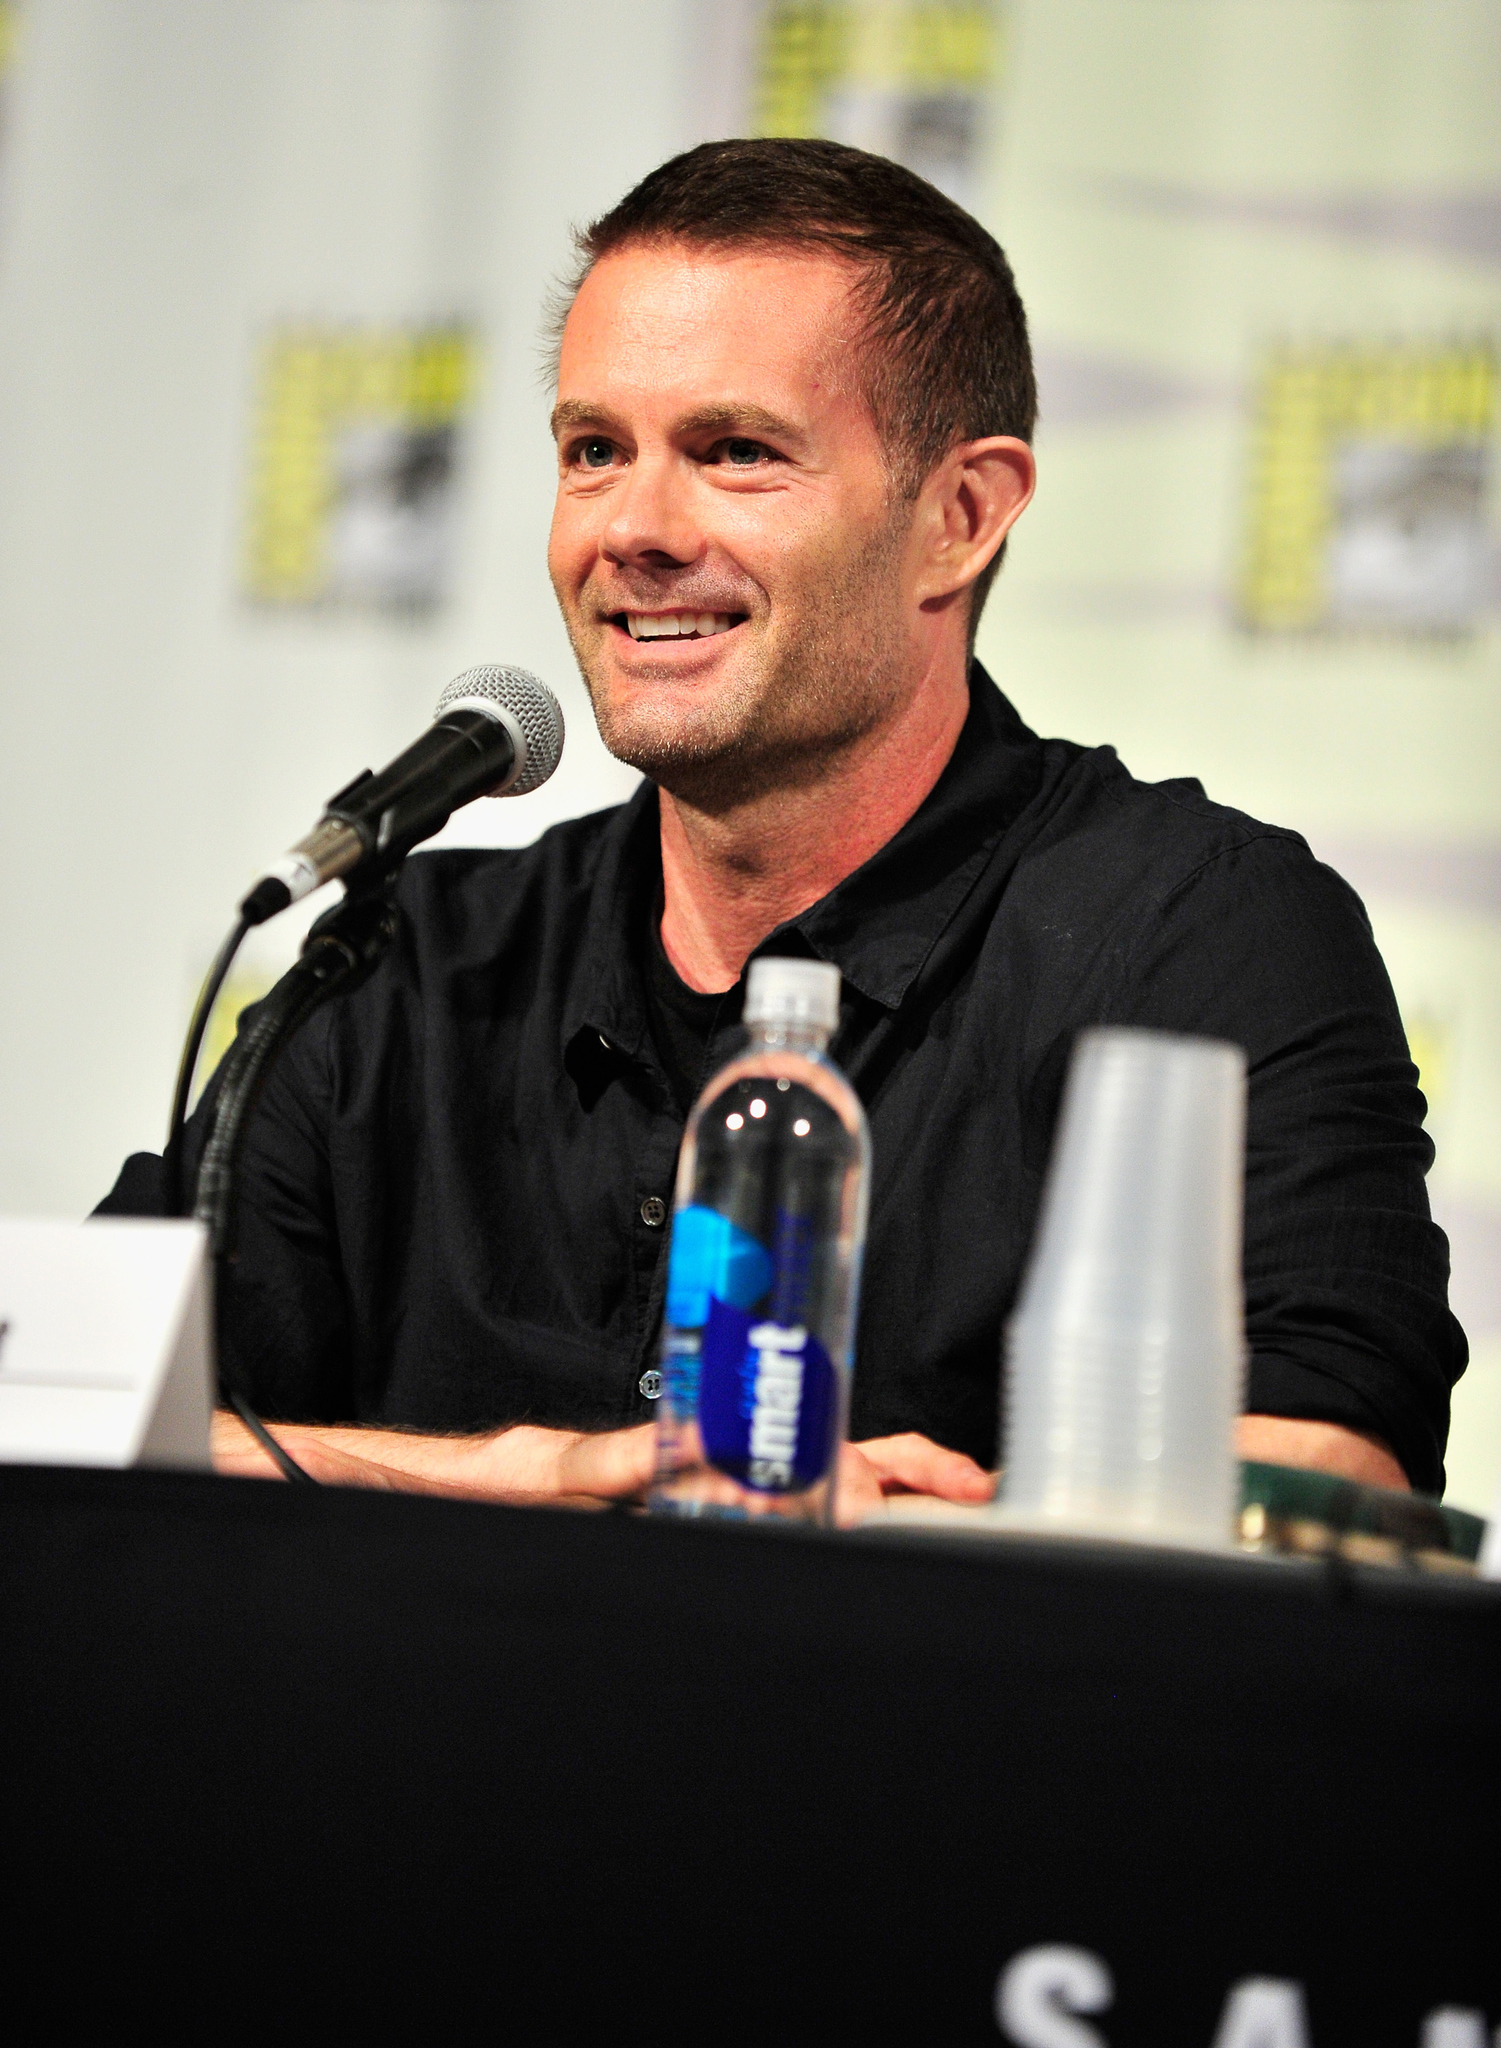 Garret Dillahunt at event of Hand of God (2014)